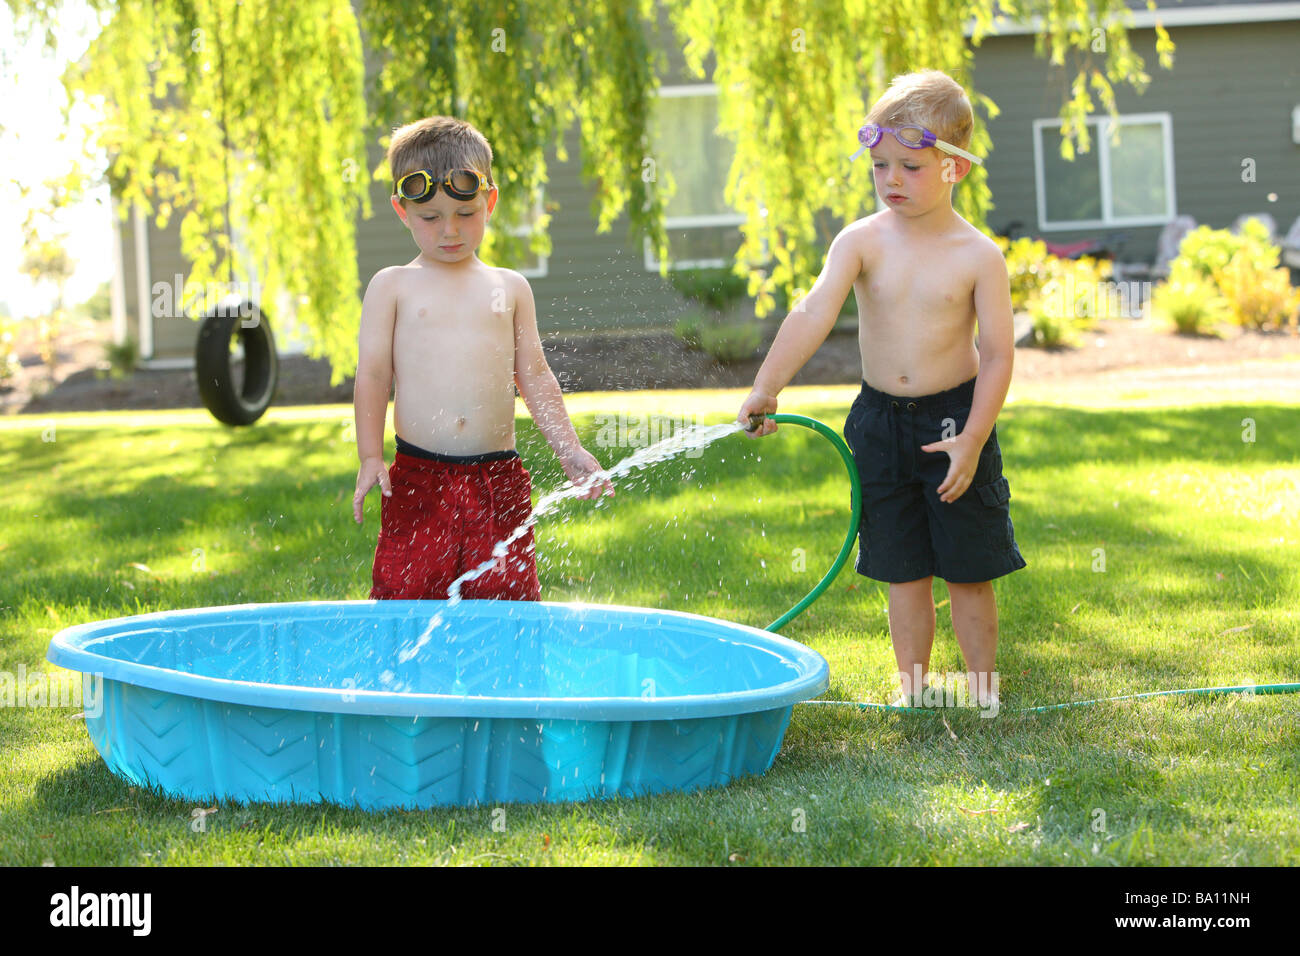 Young Boys Filling Swimming Pool Stock Photo Royalty Free Image